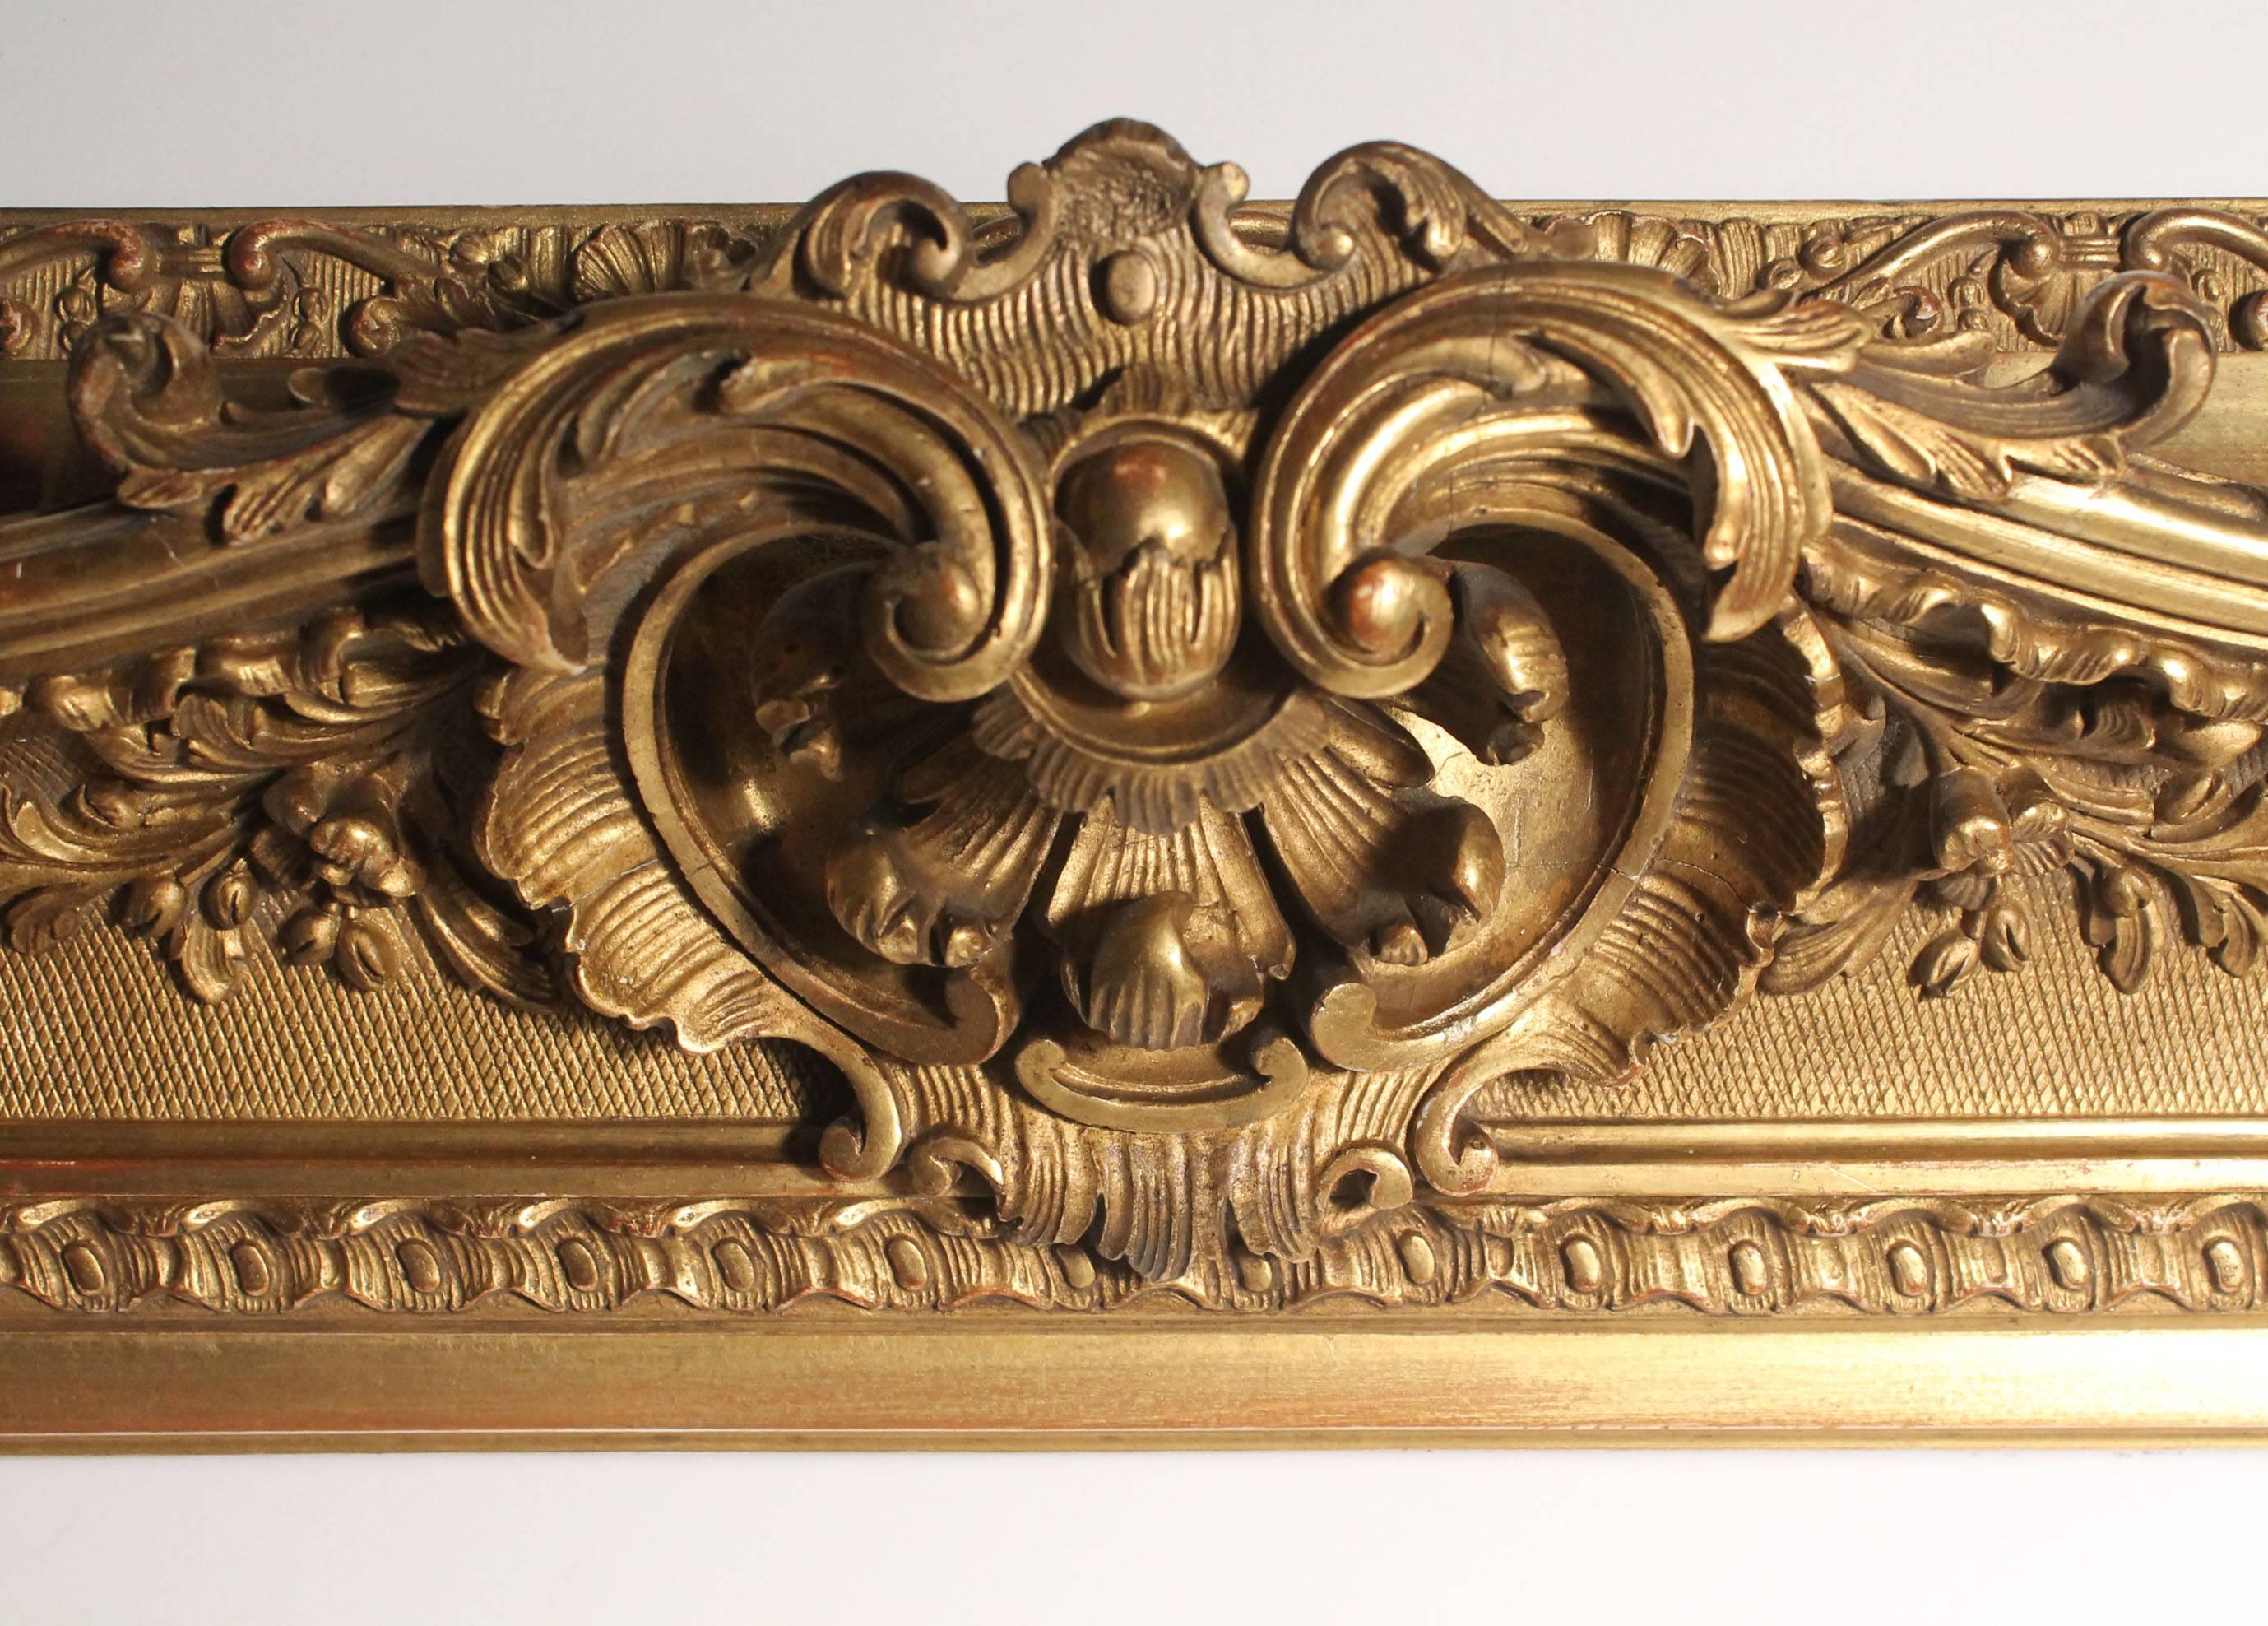 Wood Antique Italian Gilt 19th Century Picture Frame or Mirror Baroque Rococo Style